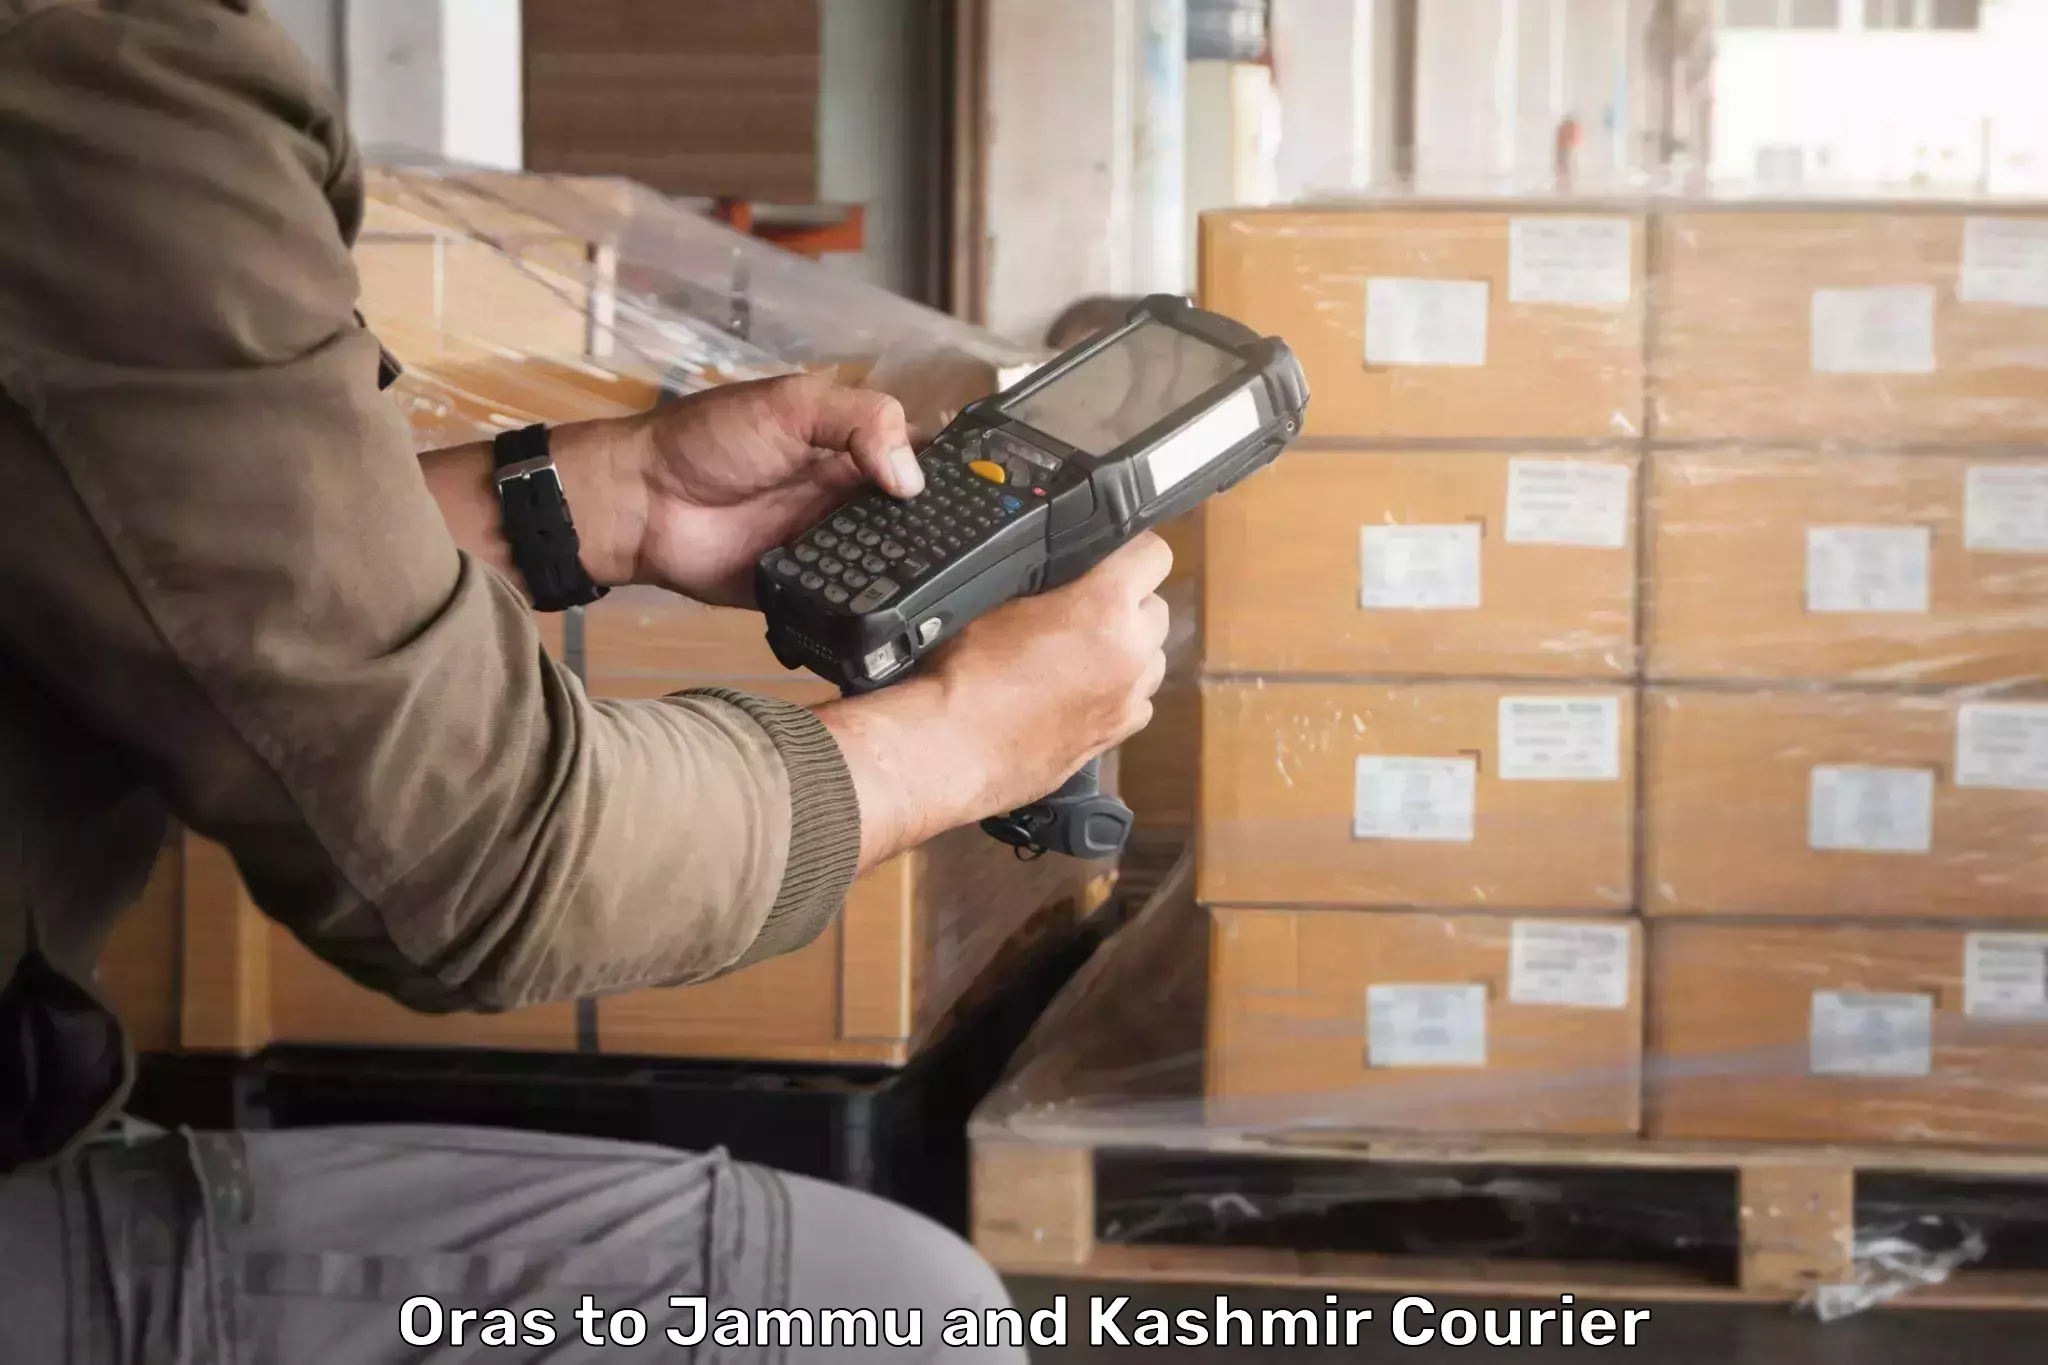 Courier app Oras to Udhampur